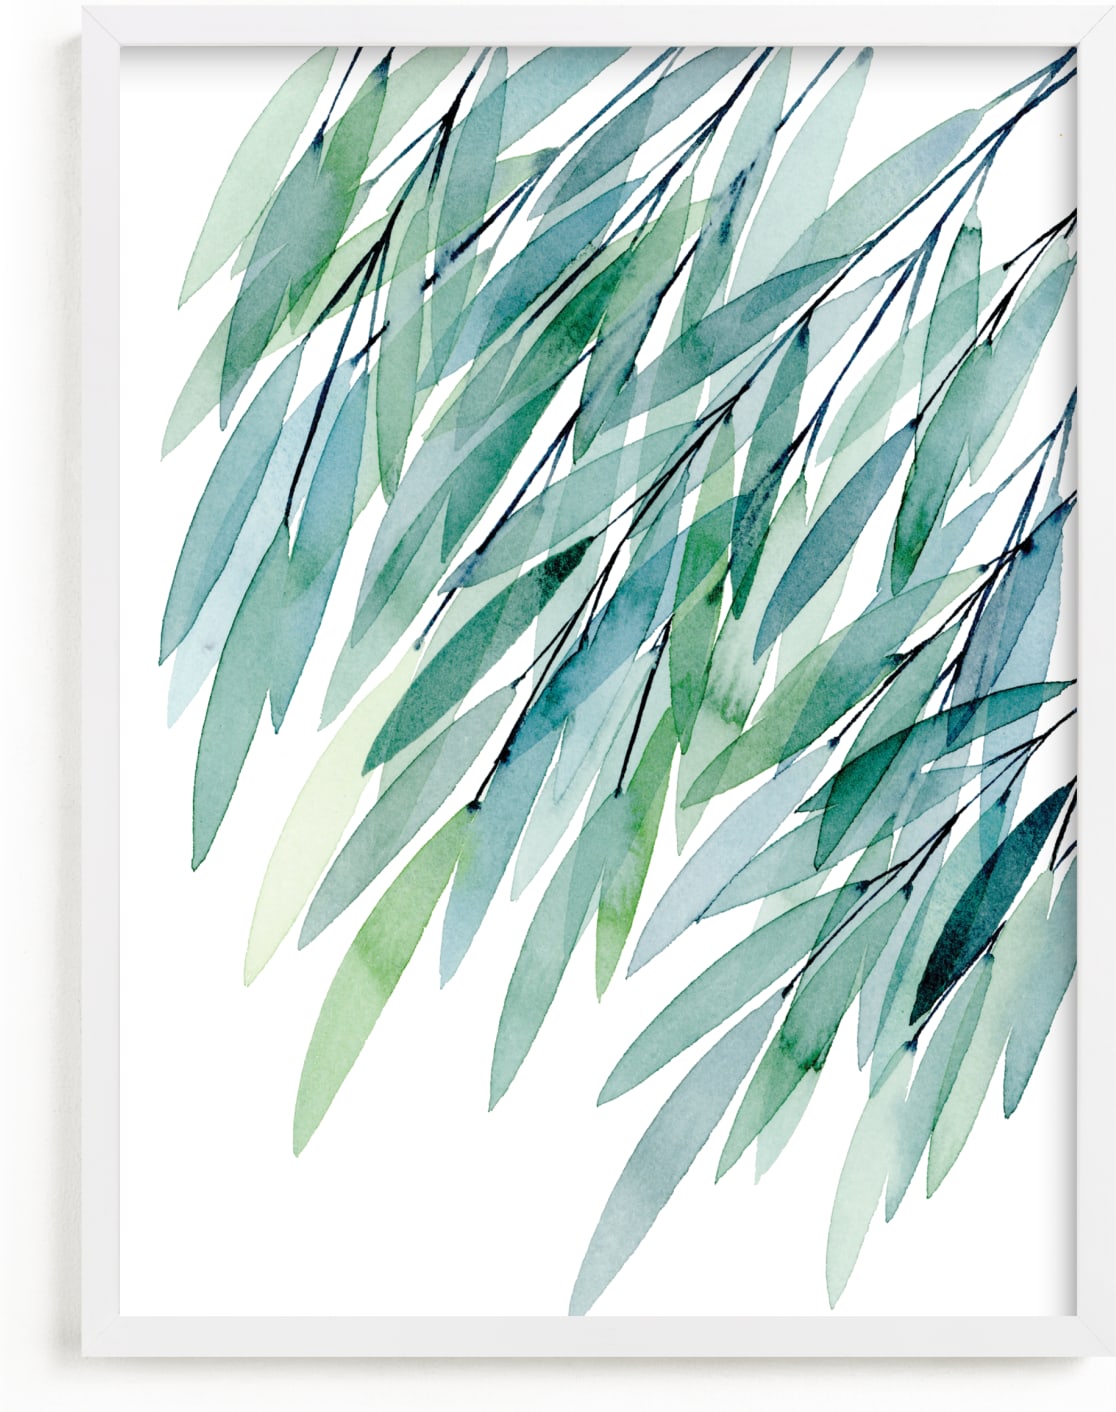 This is a blue kids wall art by Priscilla Lee called Turquoise Rustling Leaves No. 1.